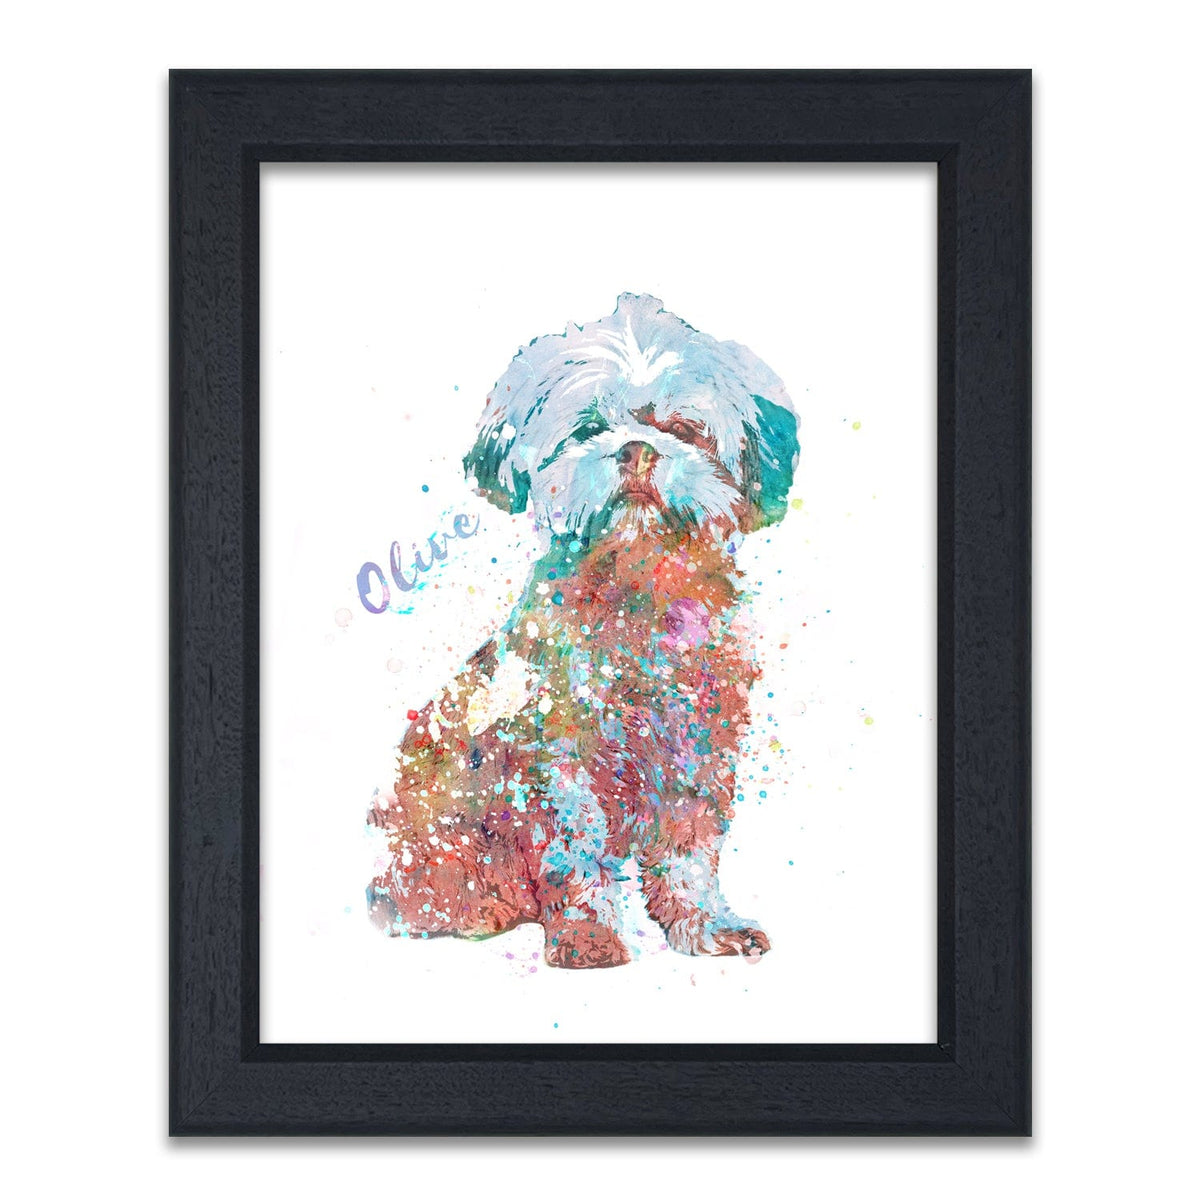 Framed Shih Tzu Watercolor art - Personalized pet gift from Personal-Prints